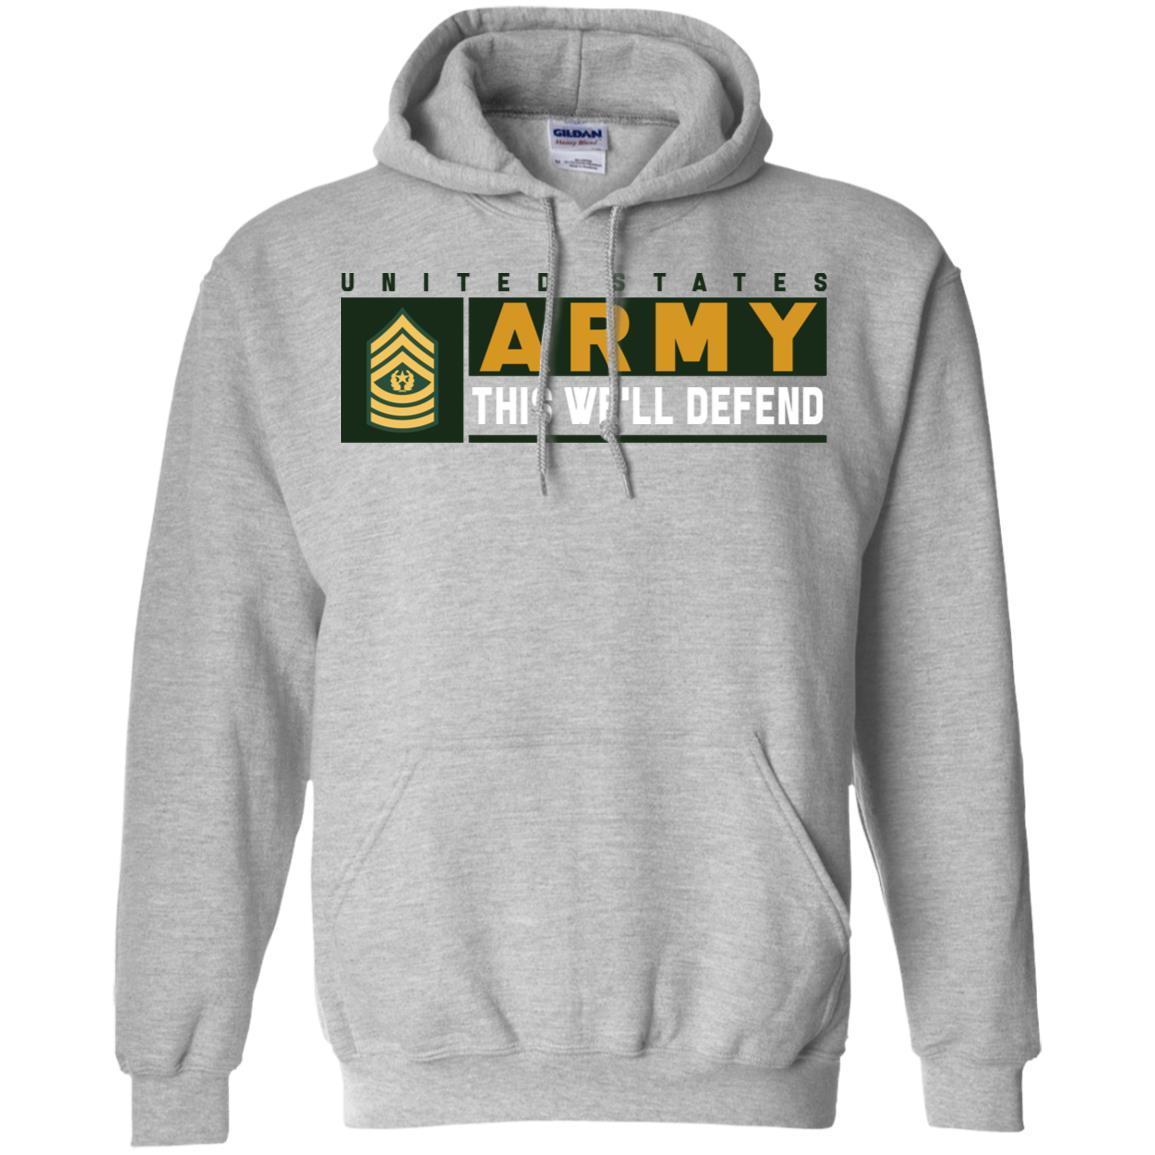 US Army E-9 CSM This We Will Defend Long Sleeve - Pullover Hoodie-TShirt-Army-Veterans Nation